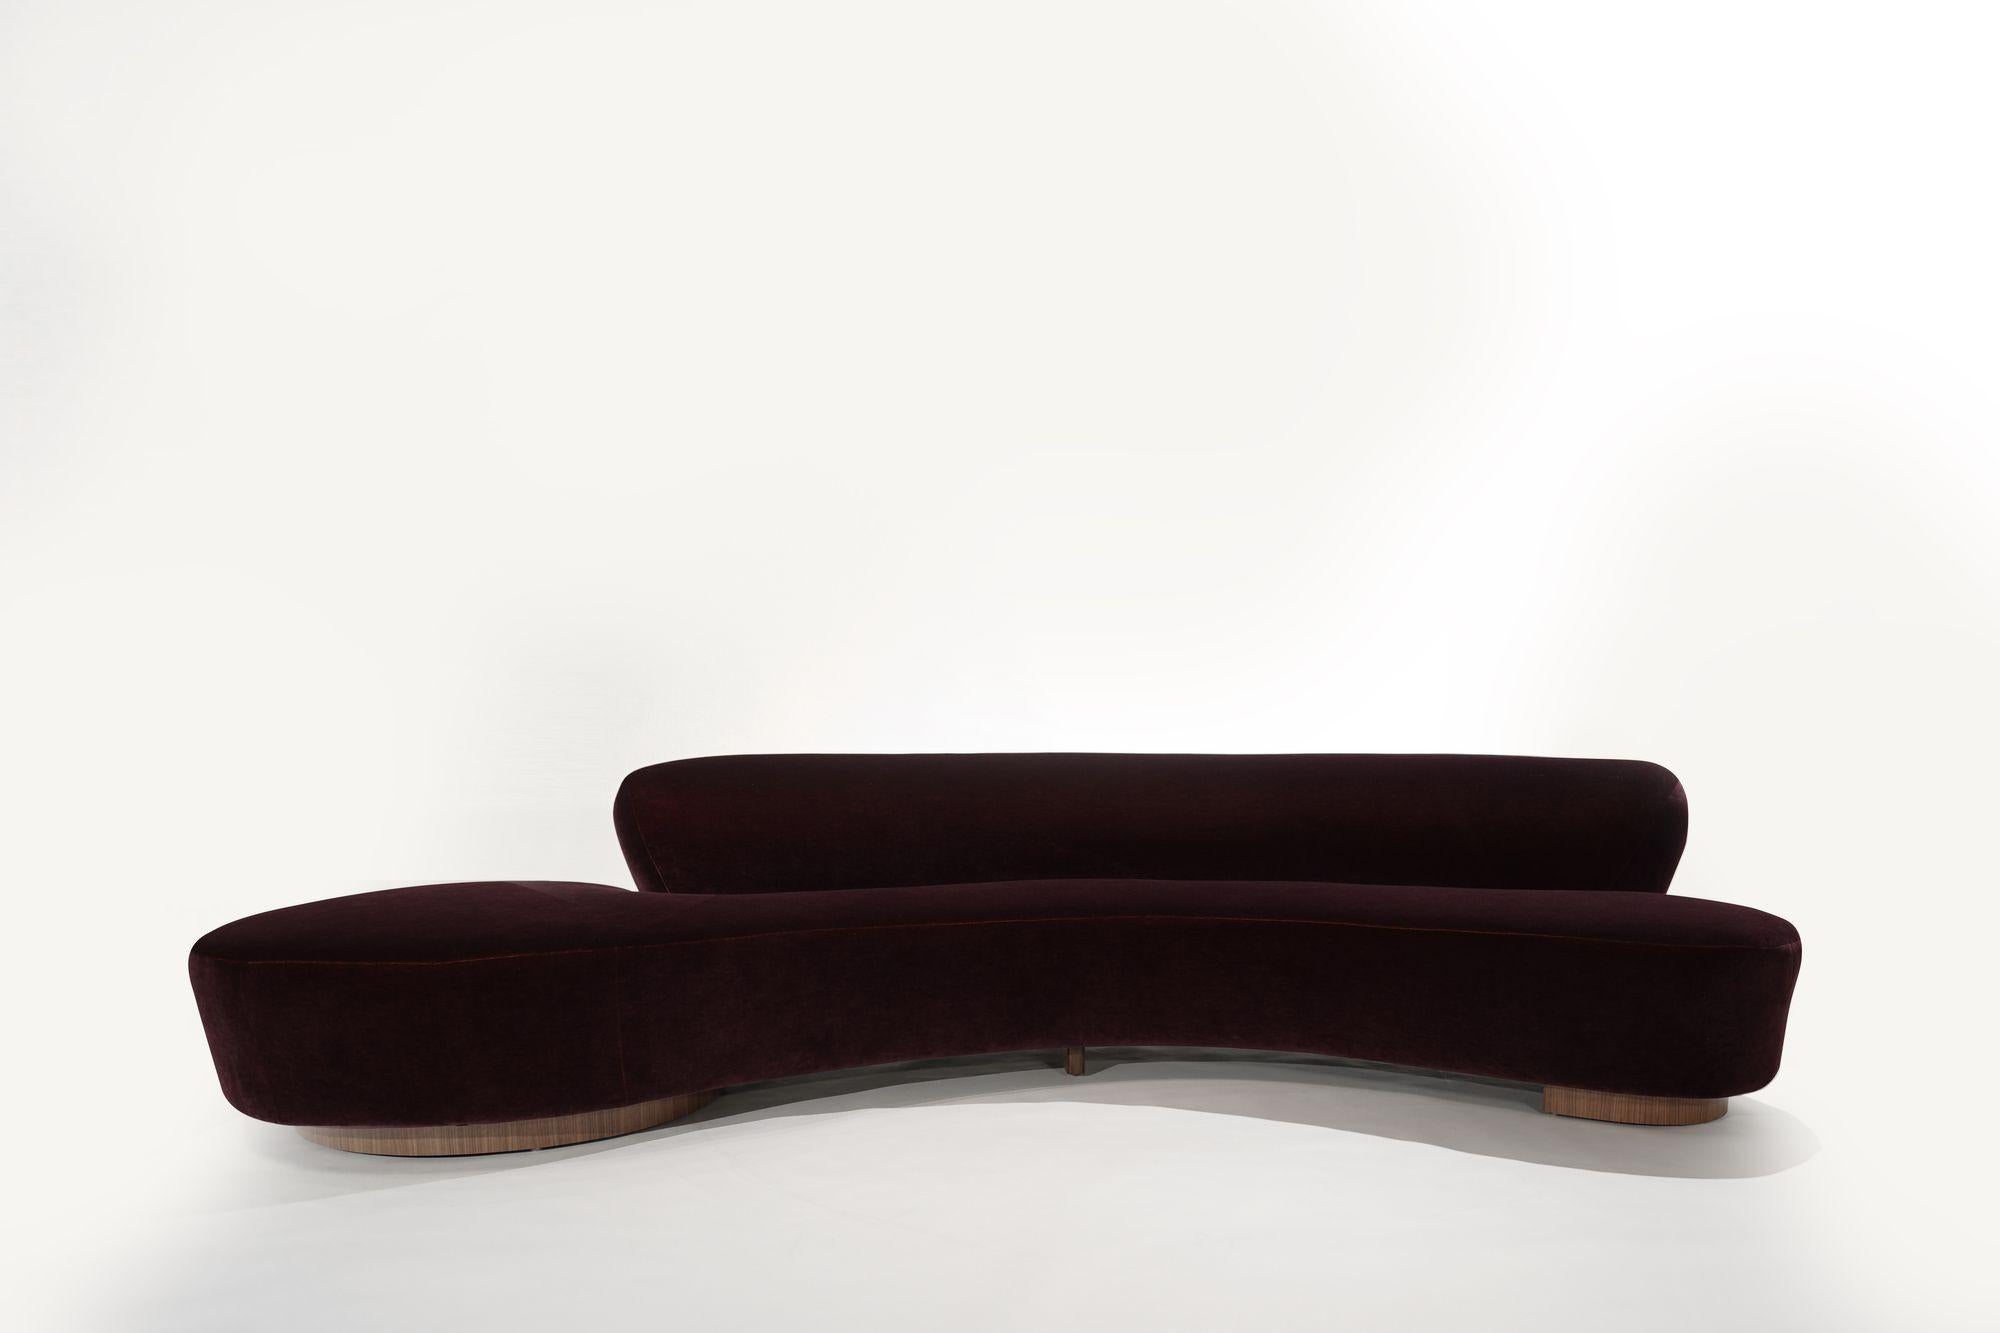 A stunning and rare Serpentine sofa, Model 150BS designed by architect and furniture designer Vladimir Kagan. It features a distinctive curved frame that gives this piece a delightful sensual design, assuring a striking proportioned profile view